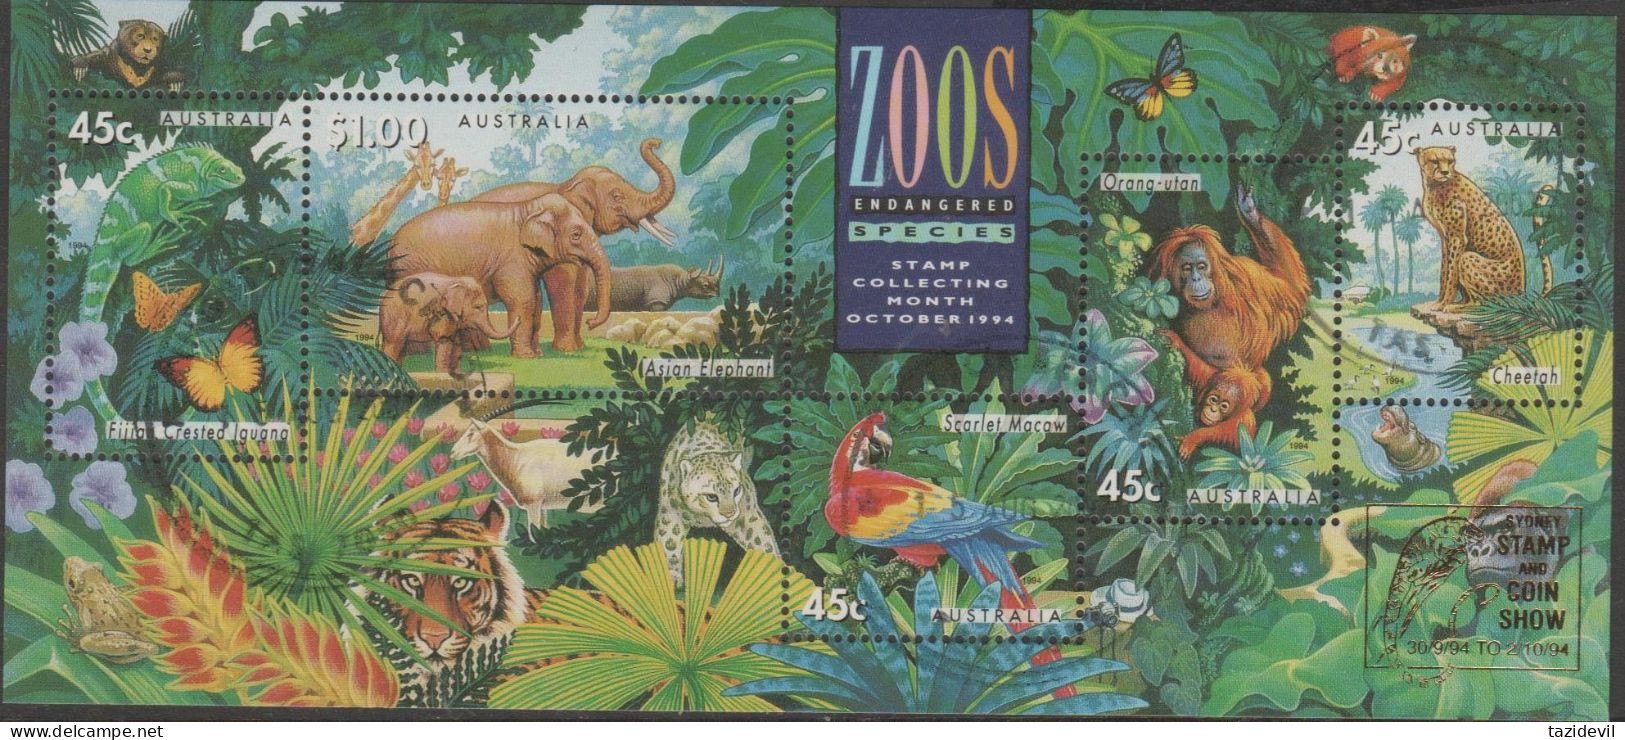 AUSTRALIA - USED - 1994 $2.80 Zoo's Souvenir Sheet Overprinted "Sydney Stamp And Coin Show" - Gebraucht